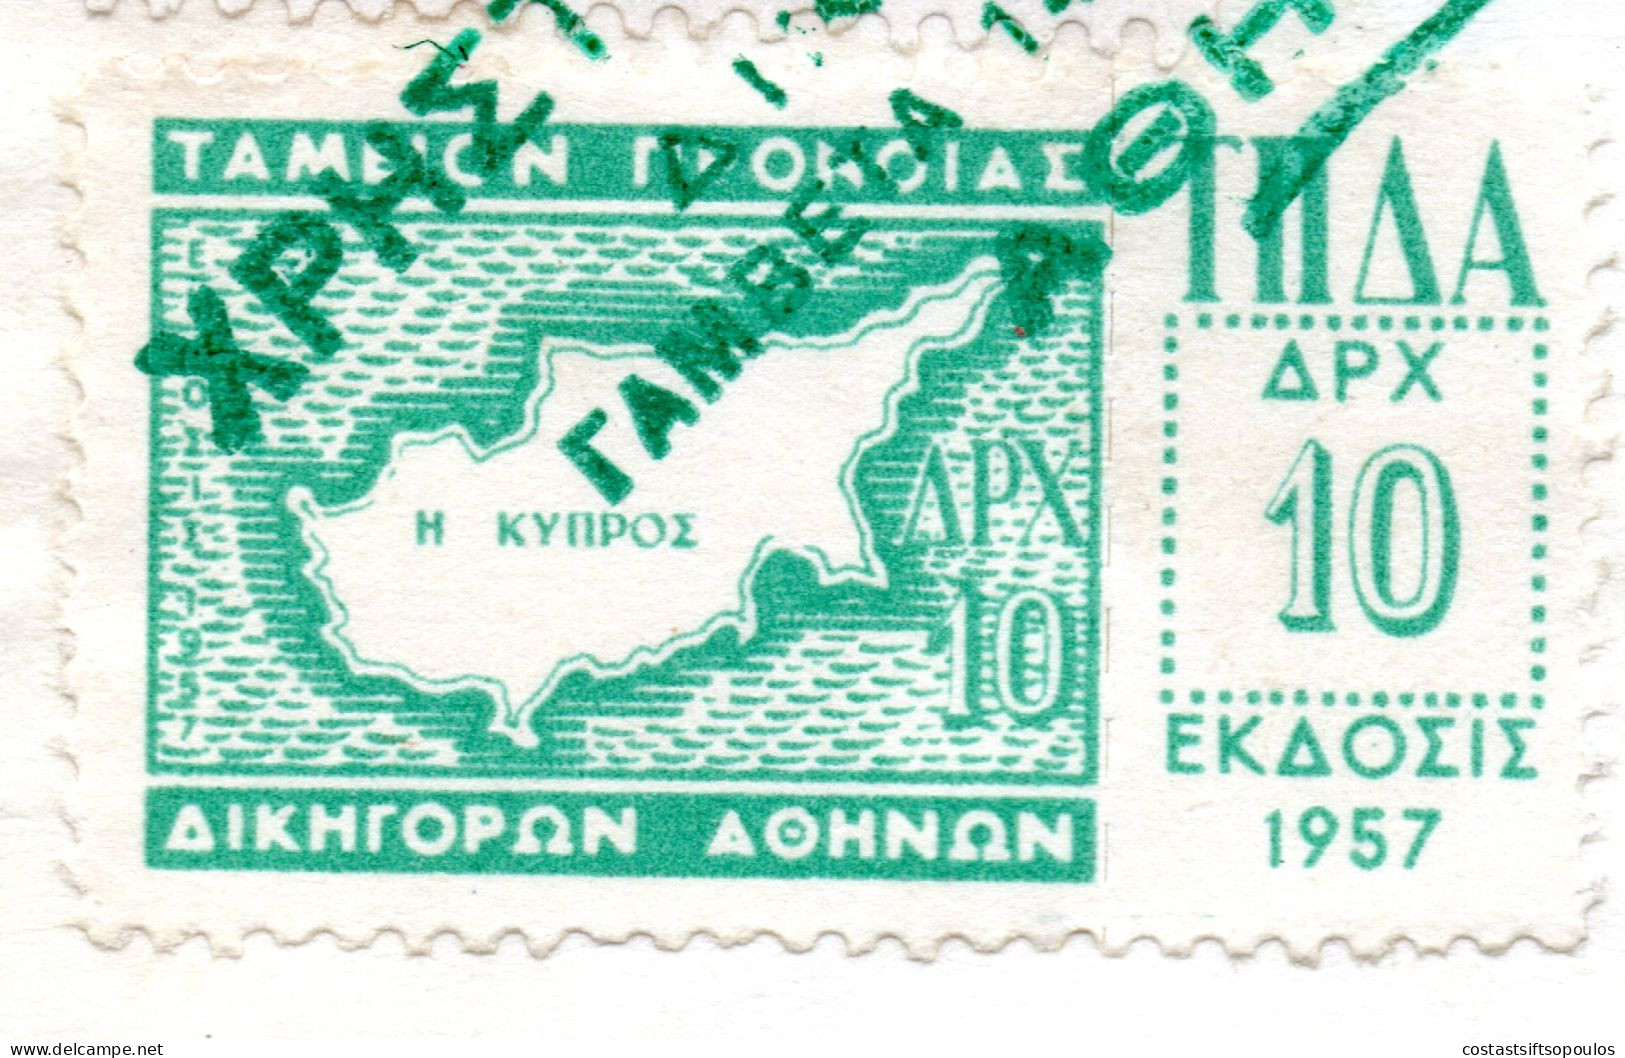 2505. GREECE. 1960 6 PAGES DOCUMENT WITH SCARCE 1957 CYPRUS MAP 10 DR. REVENUE. CROSS FOLDED. WILL BE SHIPPED FOLDED - Revenue Stamps